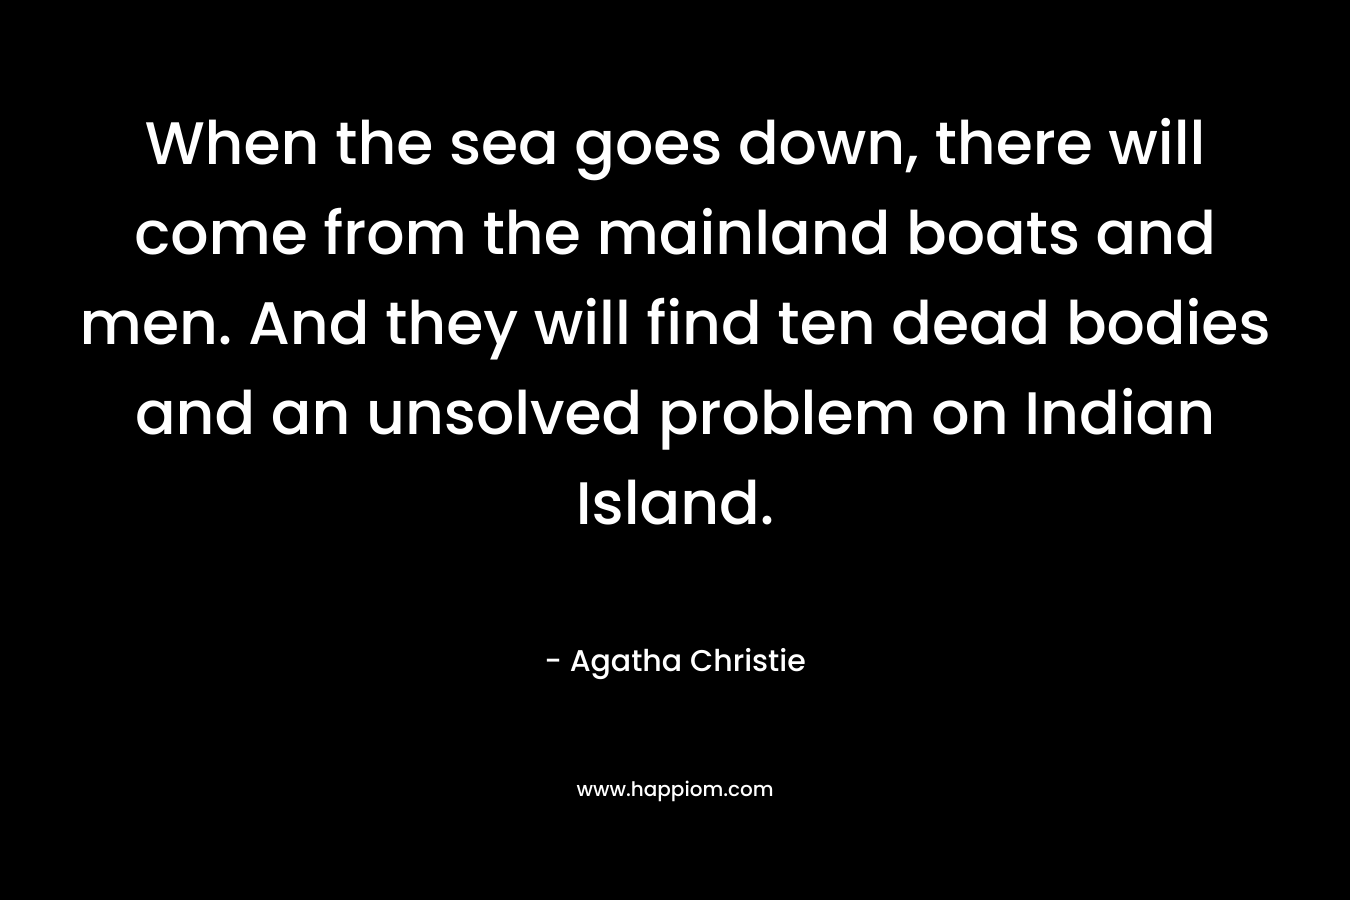 When the sea goes down, there will come from the mainland boats and men. And they will find ten dead bodies and an unsolved problem on Indian Island.